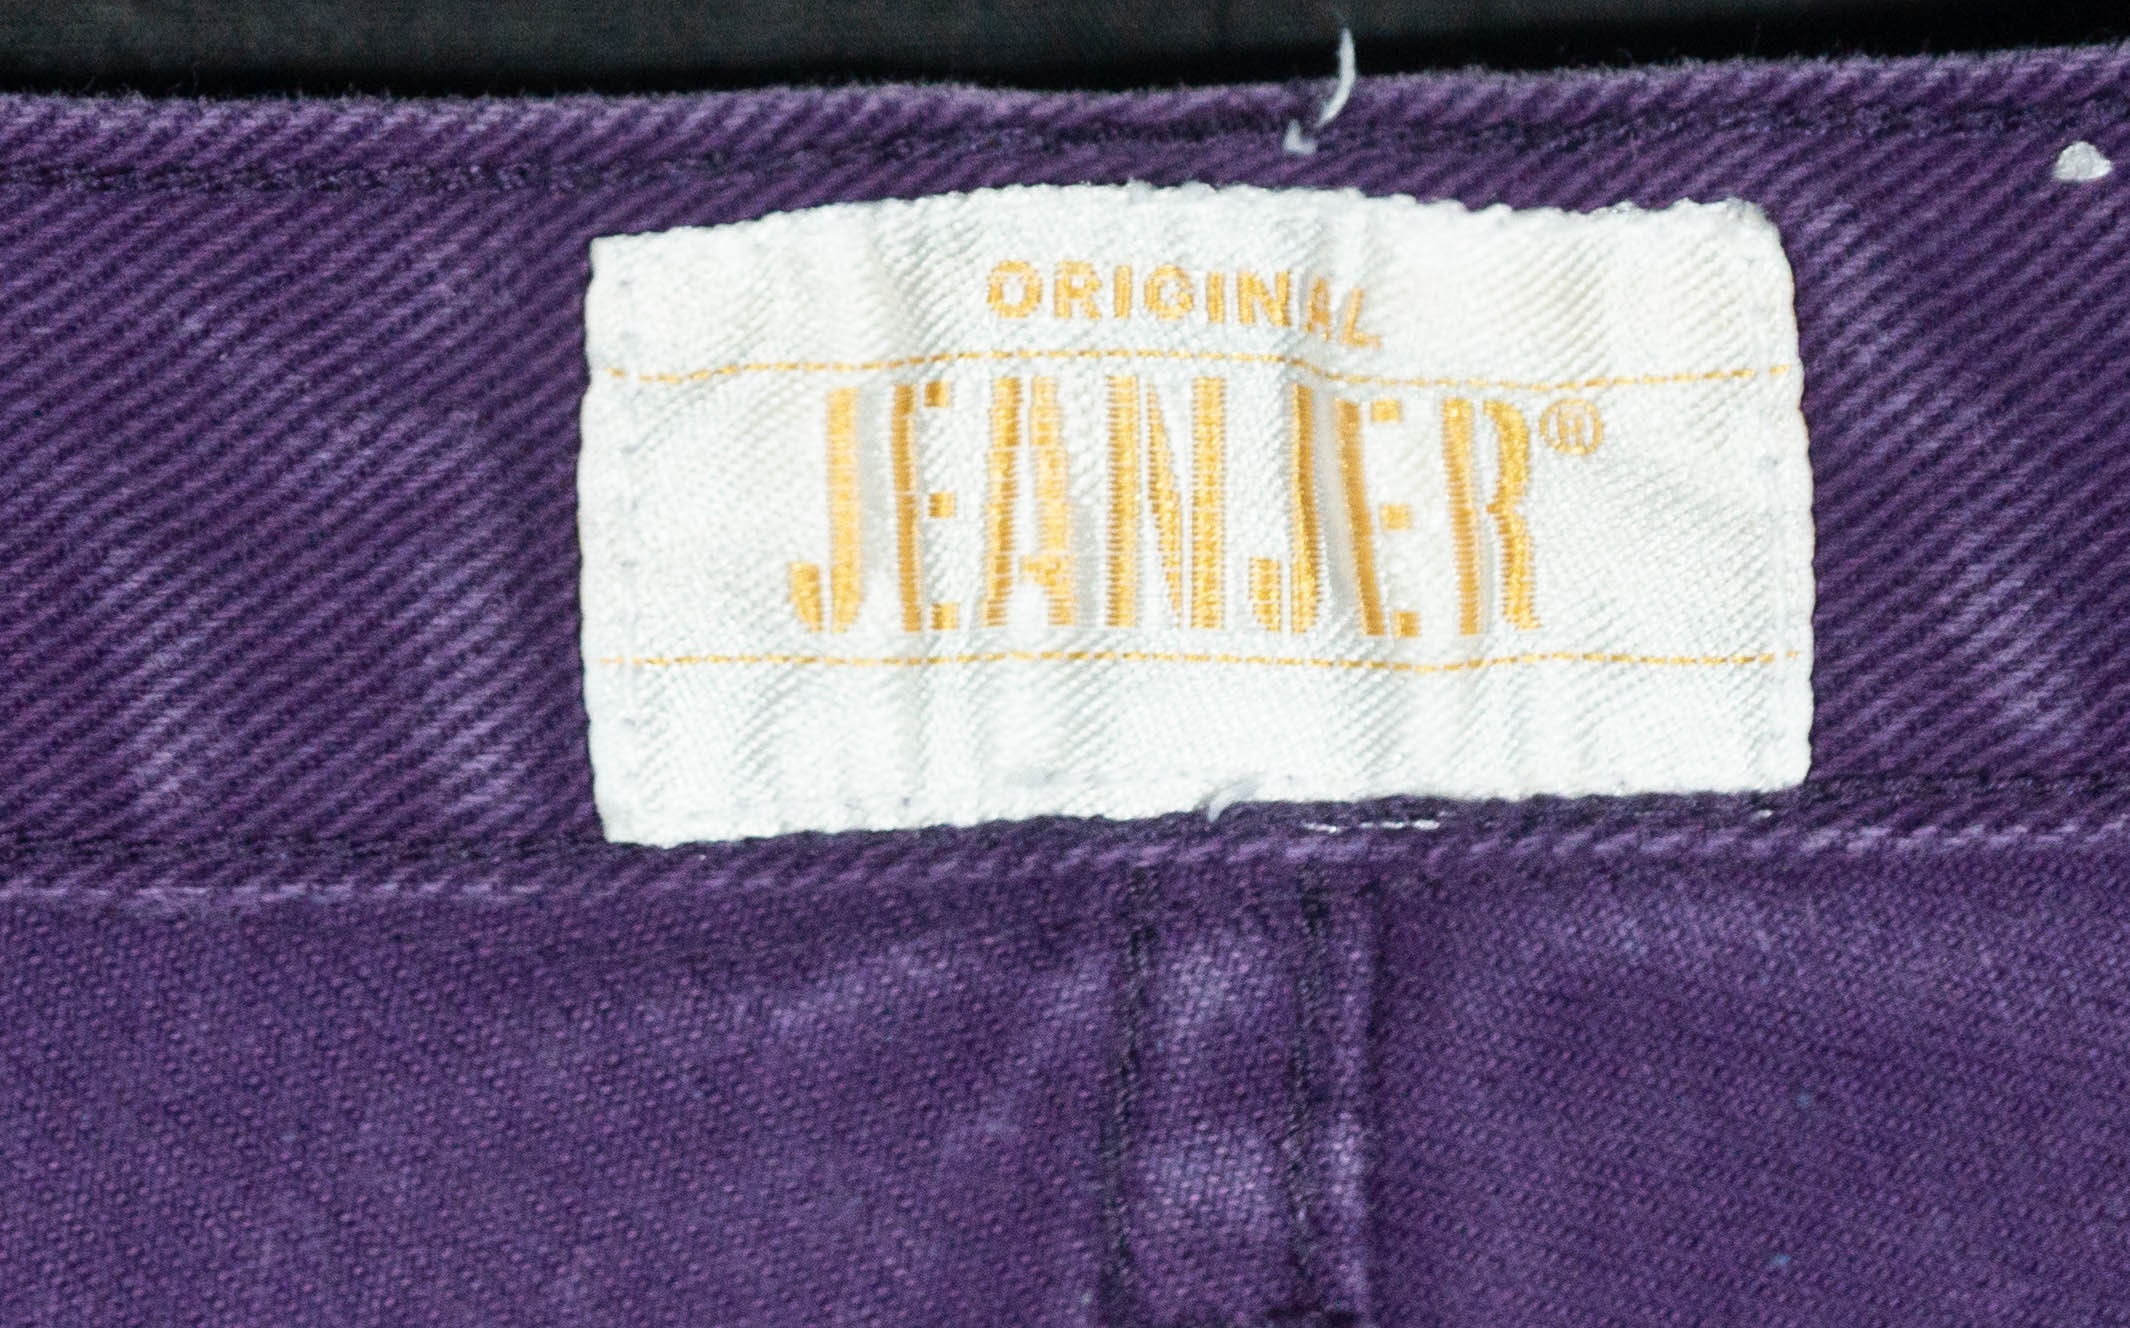 Vintage Purple Jeans 'jeanjer' Label Button Fly High Rise, Tapered Leg 27  High Waist -  Canada